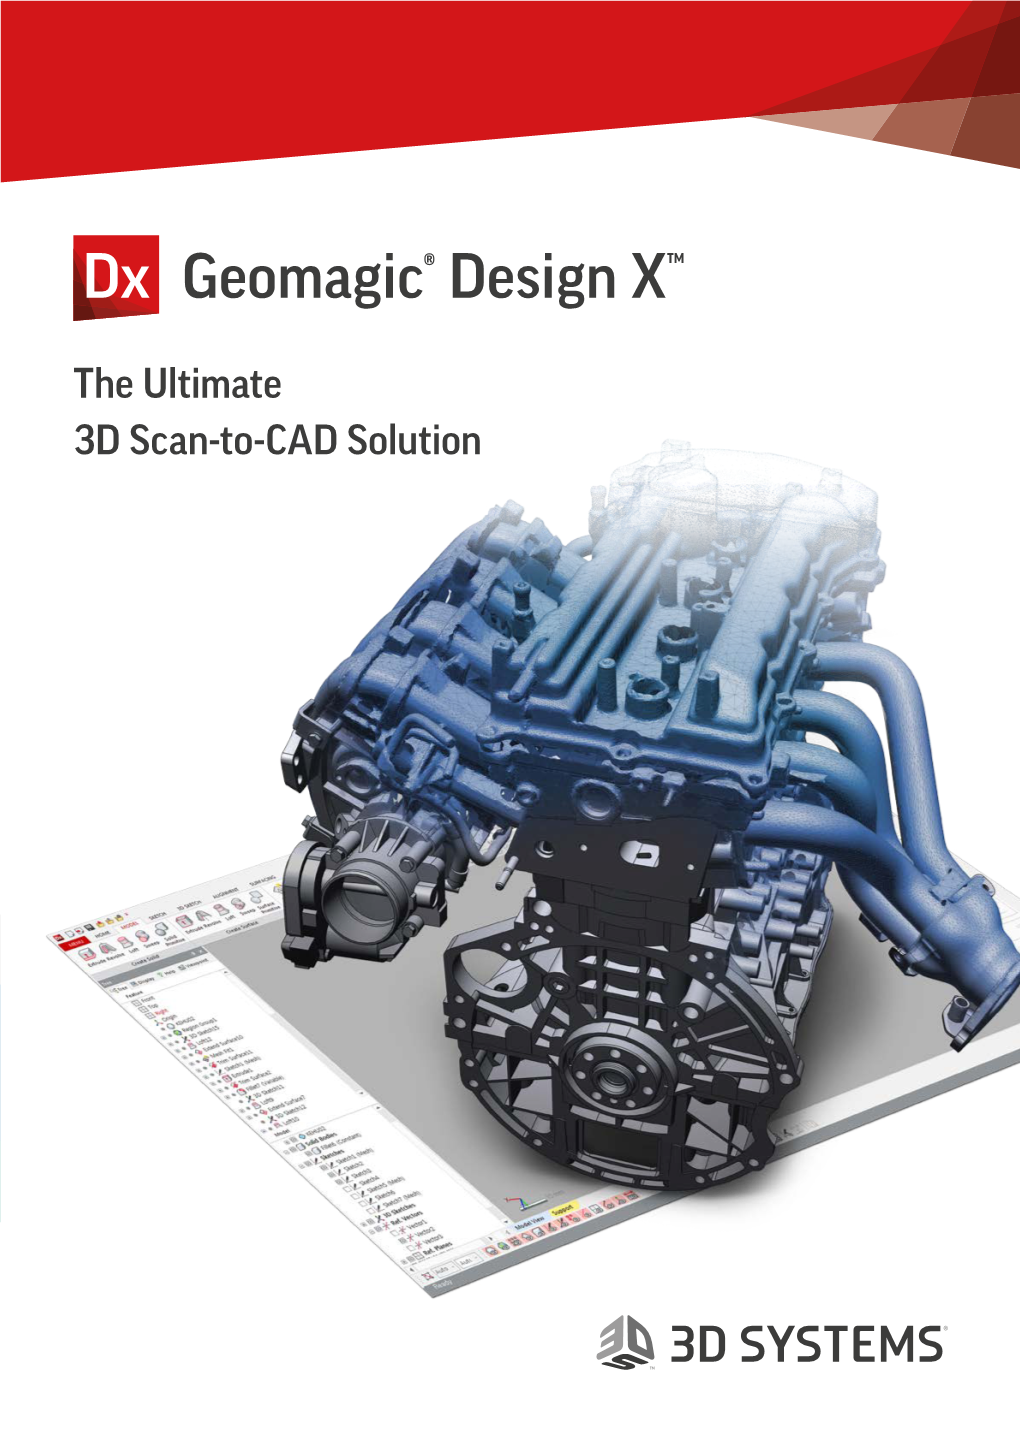 The Ultimate 3D Scan-To-CAD Solution